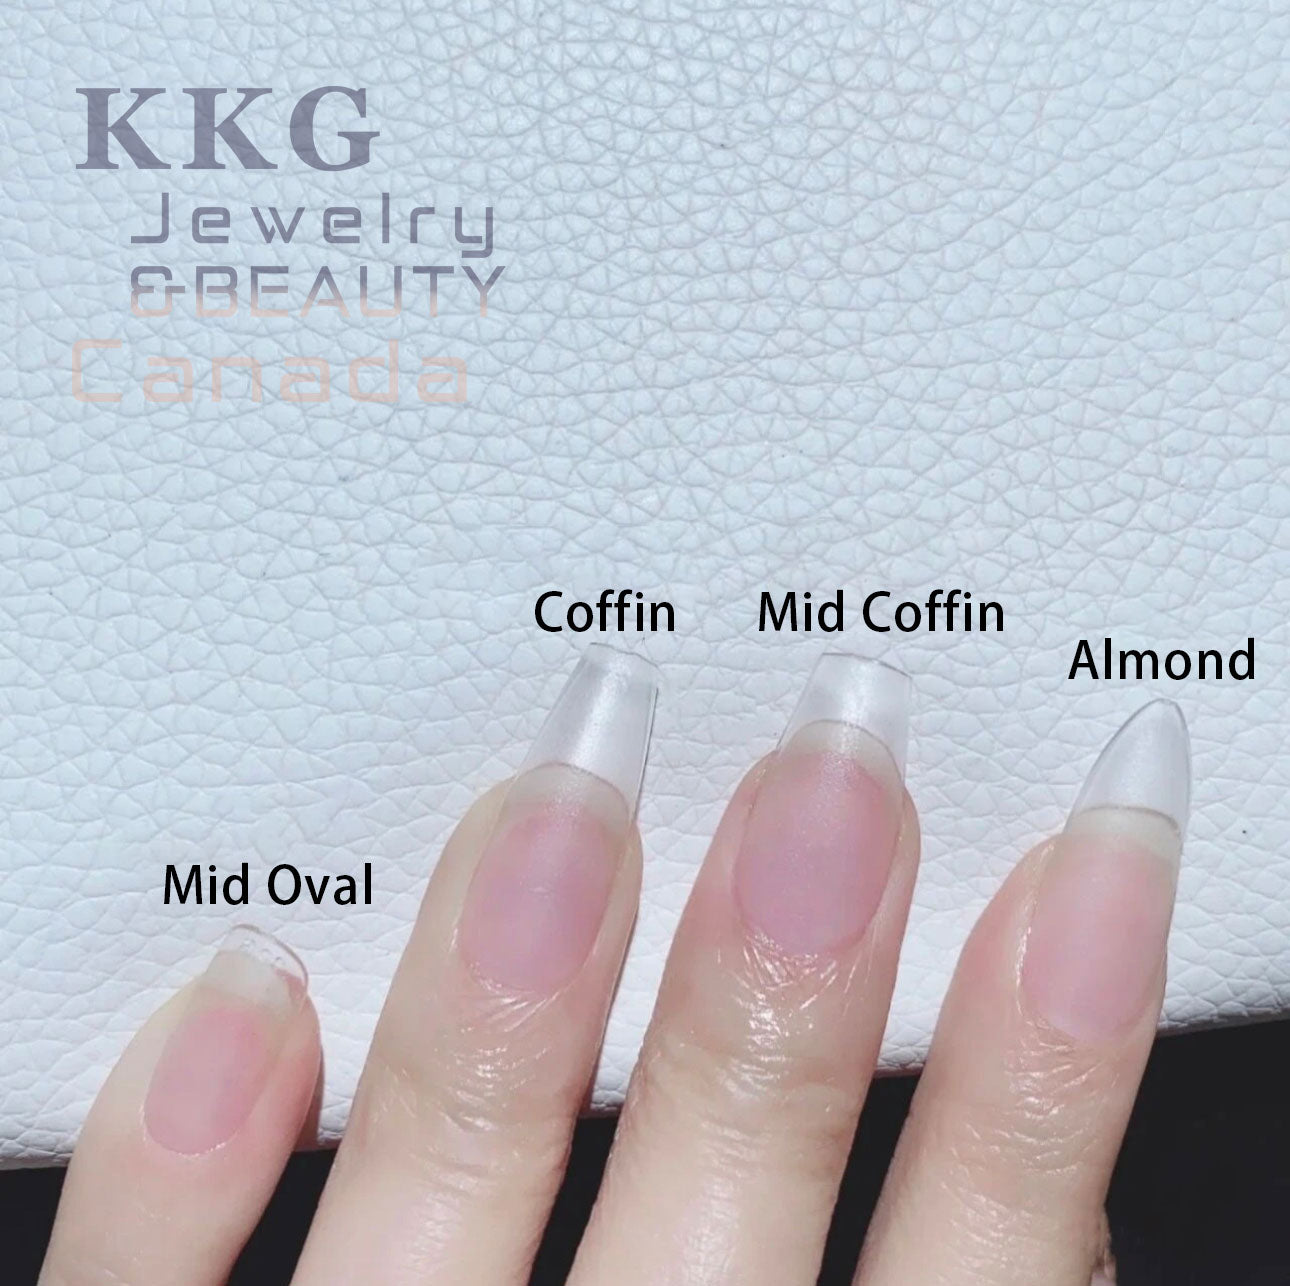 【Hand made】Exquisite Elegance in Pure Luxury Handmade False Nails